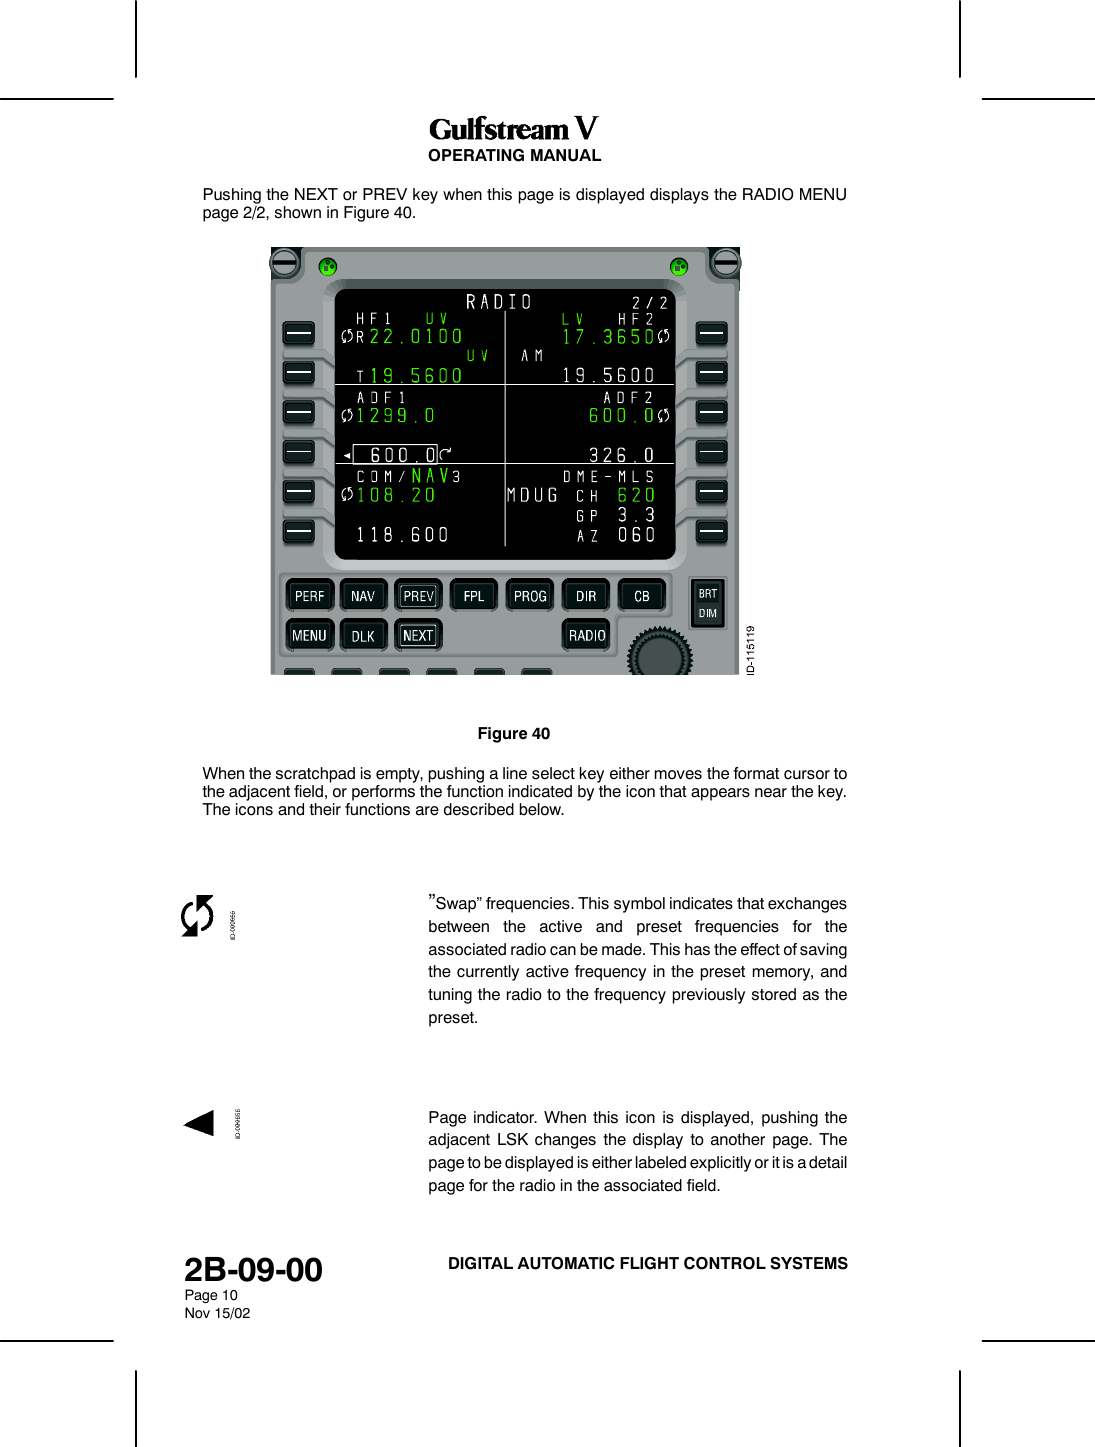 OPERATING MANUAL2B-09-00Page 10Nov 15/02DIGITAL AUTOMATIC FLIGHT CONTROL SYSTEMSPushing the NEXT or PREV key when this page is displayed displays the RADIO MENUpage 2/2, shown in Figure 40.Figure 40When the scratchpad is empty, pushing a line select key either moves the format cursor tothe adjacent field, or performs the function indicated by the icon that appears near the key.The icons and their functions are described below.”Swap” frequencies. This symbol indicates that exchangesbetween the active and preset frequencies for theassociated radio can be made. This has the effect of savingthe currently active frequency in the preset memory, andtuning the radio to the frequency previously stored as thepreset.Page indicator. When this icon is displayed, pushing theadjacent LSK changes the display to another page. Thepage to be displayed is either labeled explicitly or it is a detailpage for the radio in the associated field.